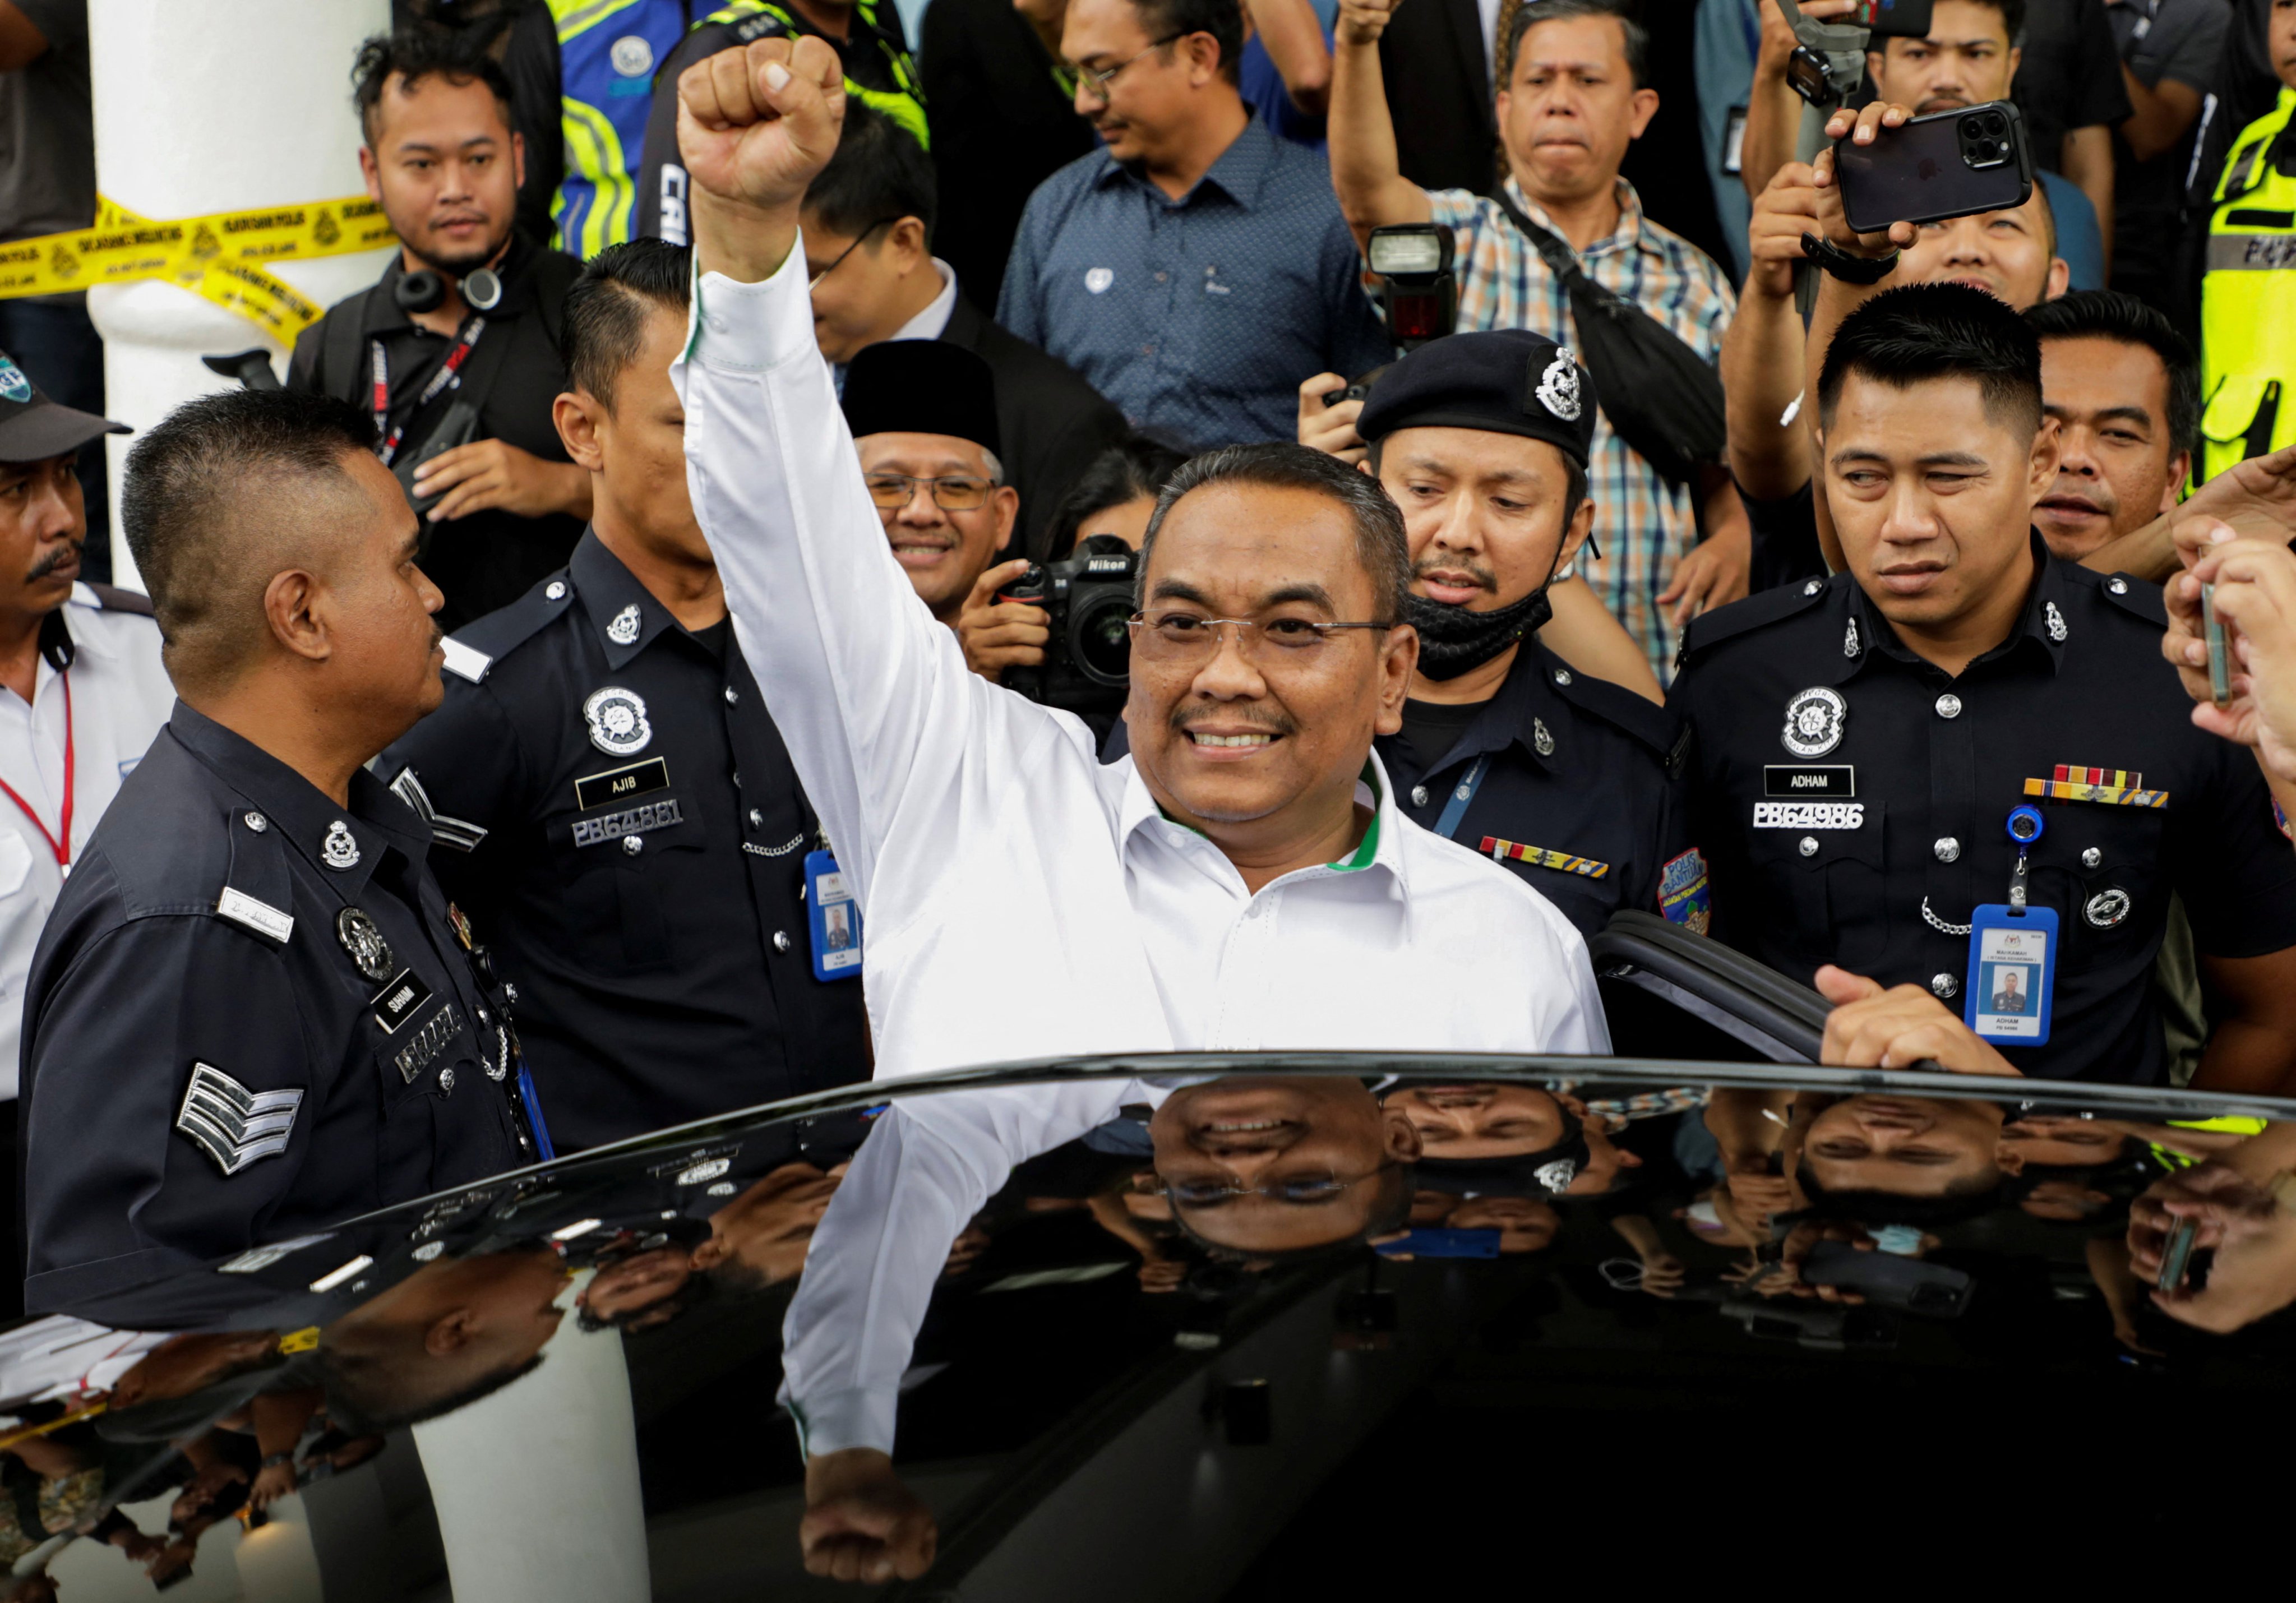 Malaysian opposition leader Muhammad Sanusi Md Nor raises his fist as he leaves a court where he was charged in Gombak, Malaysia on July 18. His decision to ban gambling and clamp down on alcohol has made him very popular in a state where more than 80 per cent of people are Muslims. Photo: Reuters